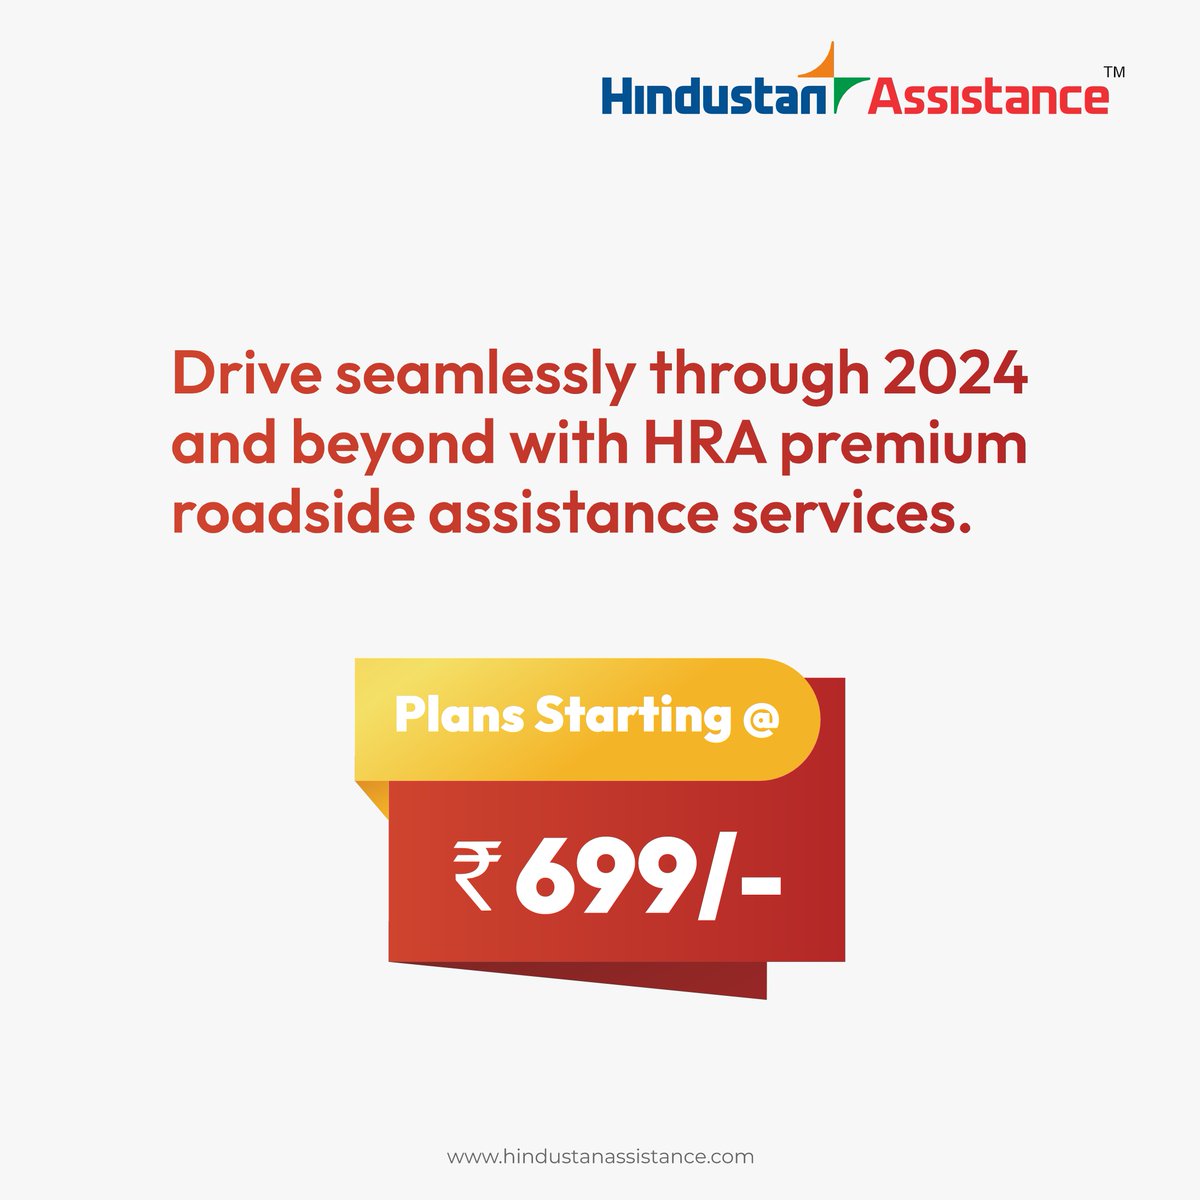 Drive worry-free in 2024 with HRA #RoadsideAssistance ! Plans from INR 699, ensuring a confident journey. Support is just a call away. Subscribe now at 1800 2121 833.
 #travel #journey #24hourssupport #roadsafety #safety #vehiclecare #captaincy #Siraj #Japan #GalaxyUnpacked